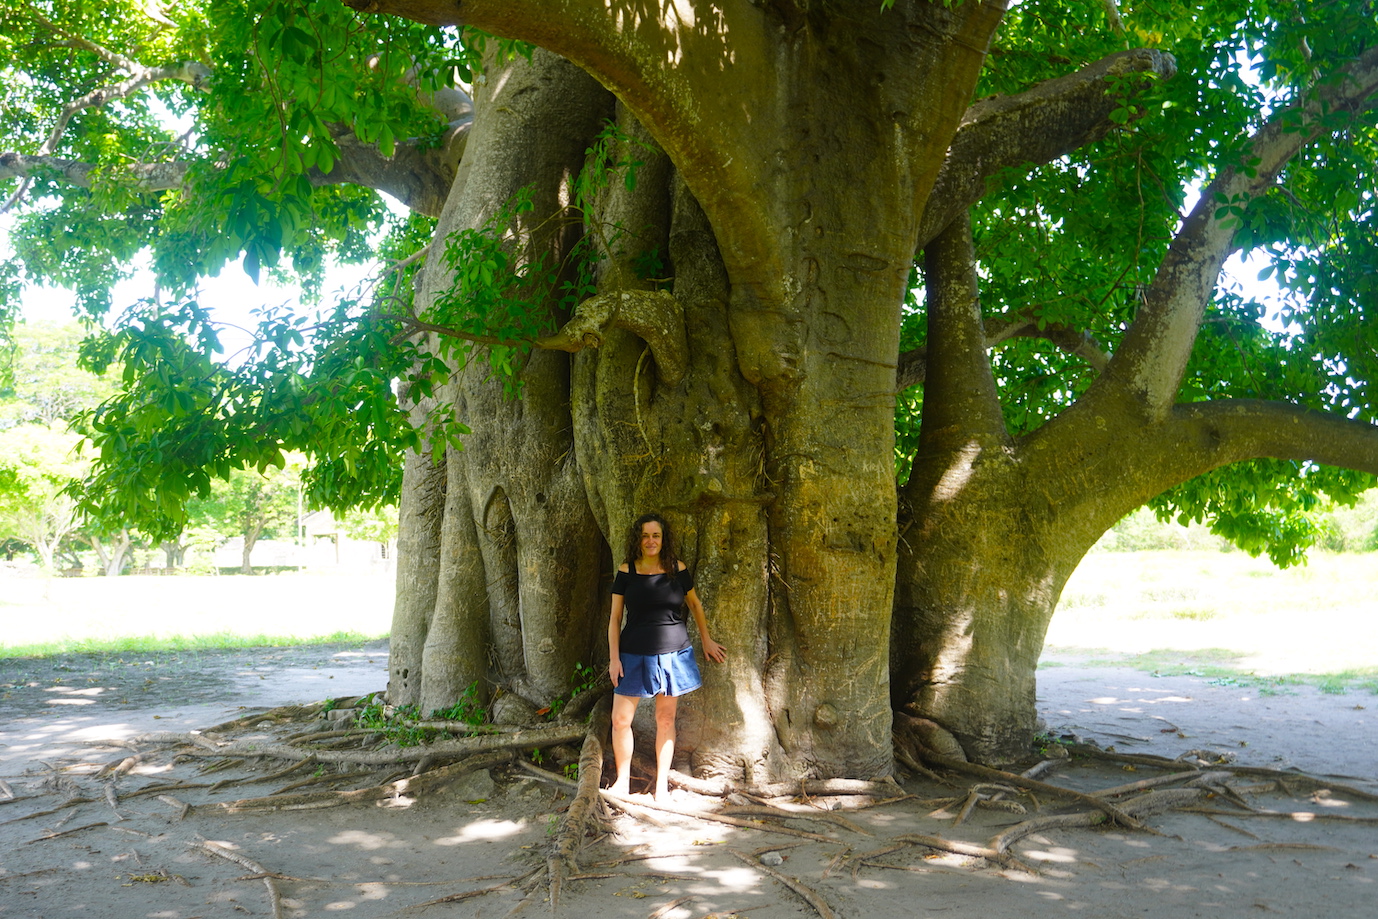 Pilar standing close to the magical tree in the Kaole ruins in Tanzania